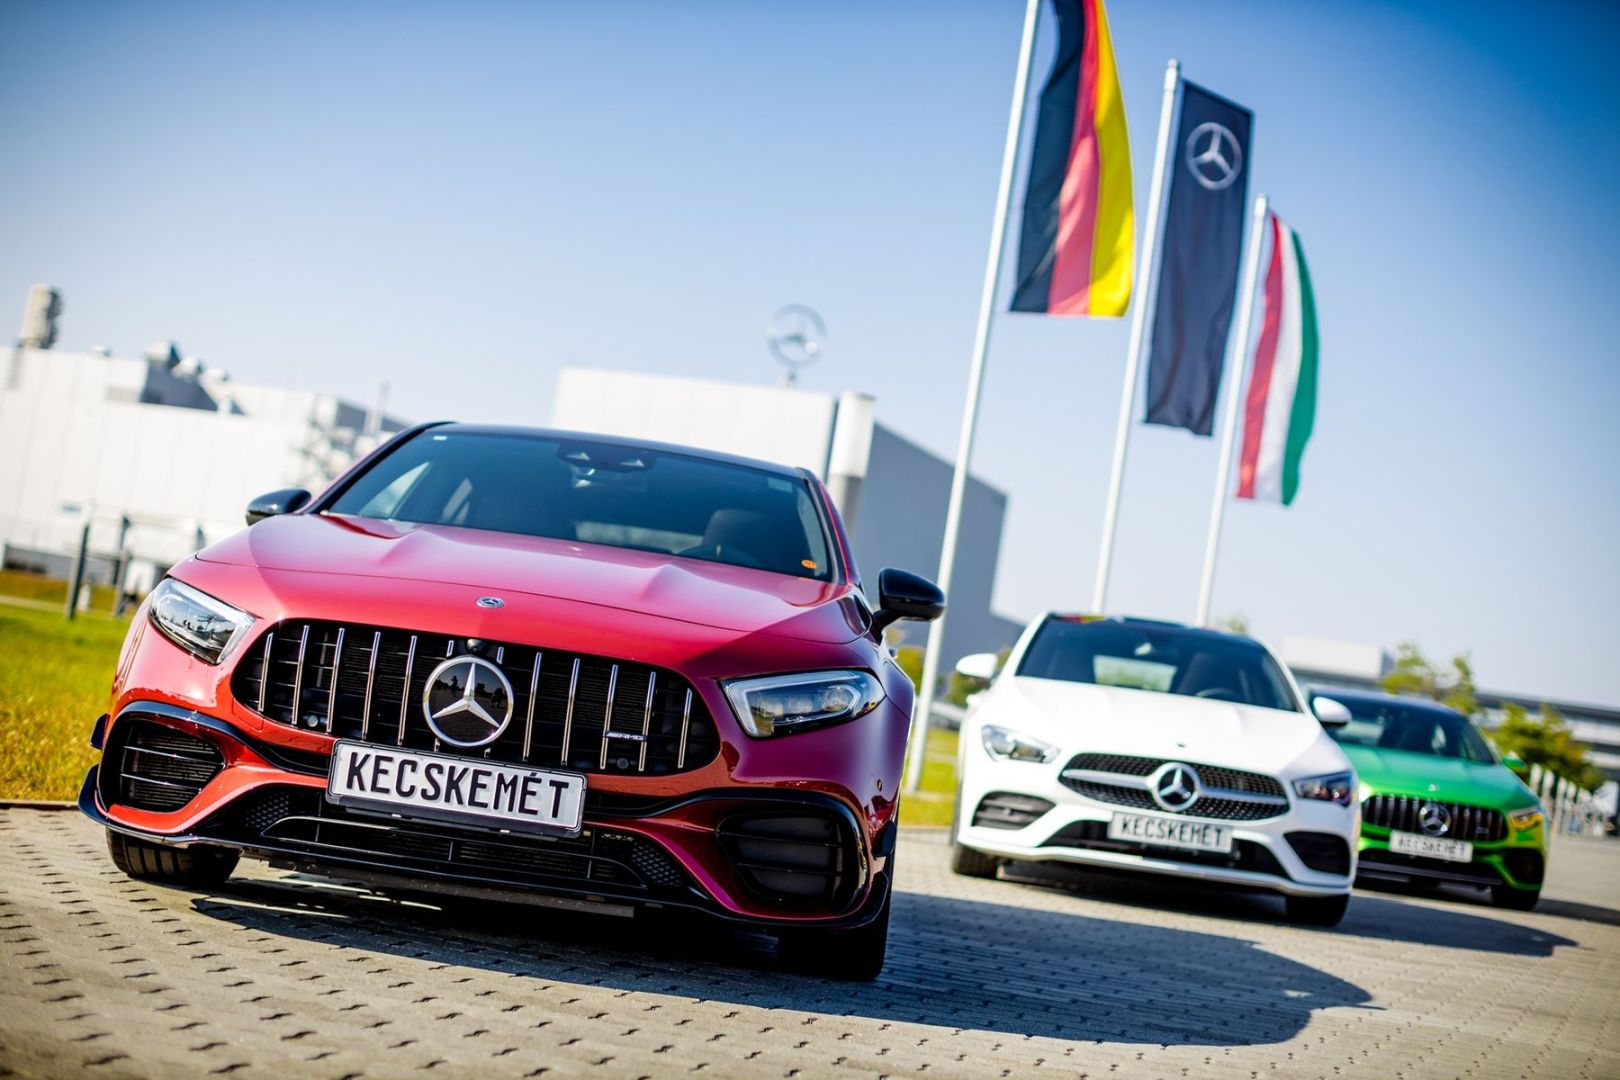 THE MERCEDES-BENZ FACTORY CELEBRATED KECSKEMÉT CITY DAY WITH THE COLORS OF THE TWO NATIONS